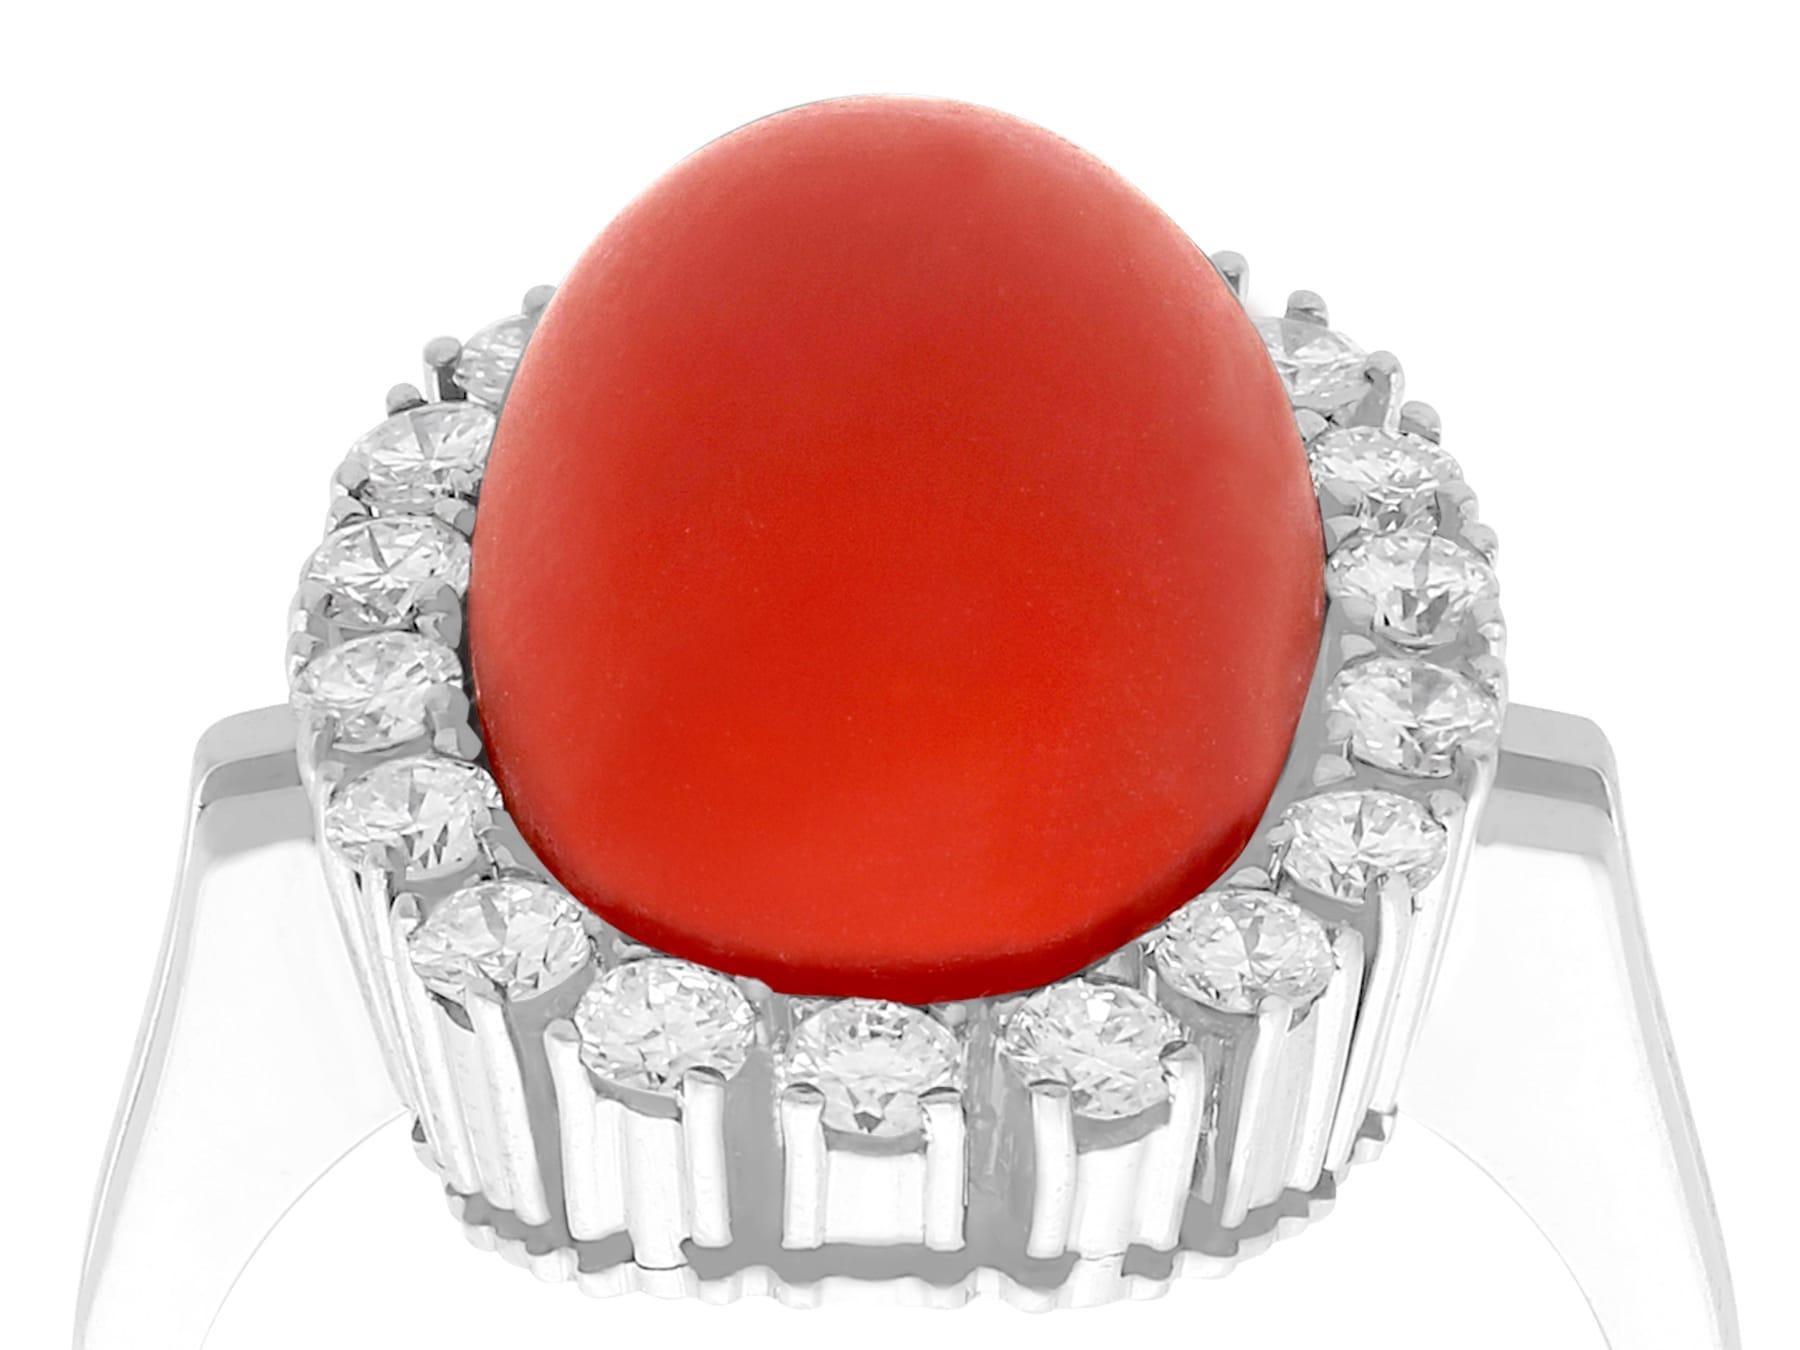 An impressive vintage 7.36 carat red coral and 0.80 carat diamond, 18 karat white gold cluster ring; part of our diverse gemstone jewelry collections.

This fine and impressive cabochon cut red coral and diamond ring has been crafted in 18k white